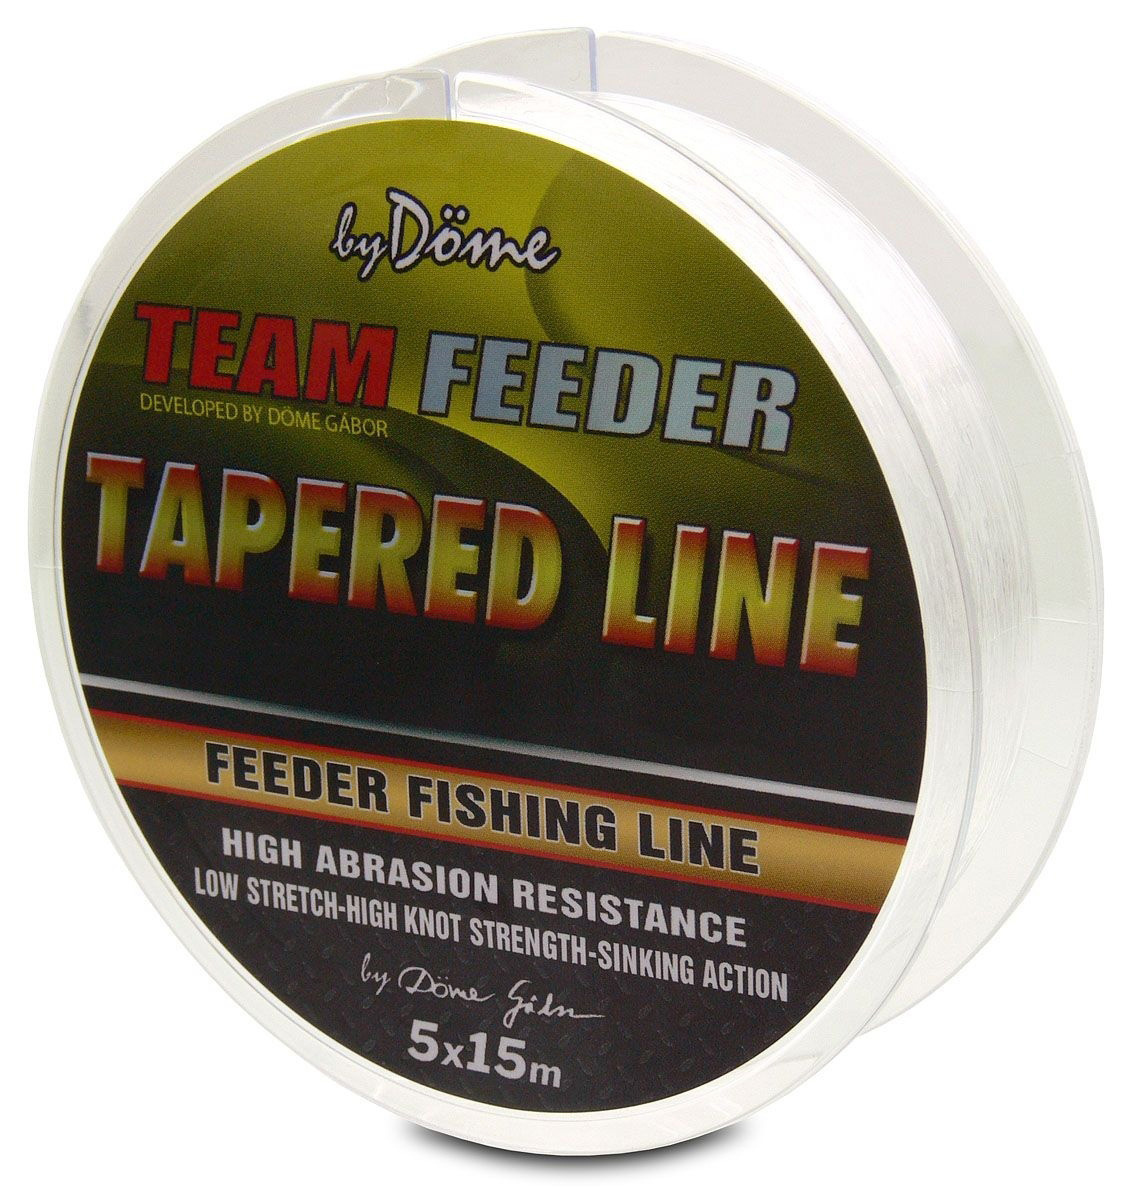 BY DÖME TEAM FEEDER TAPERED LINE 0.18-0.25MM